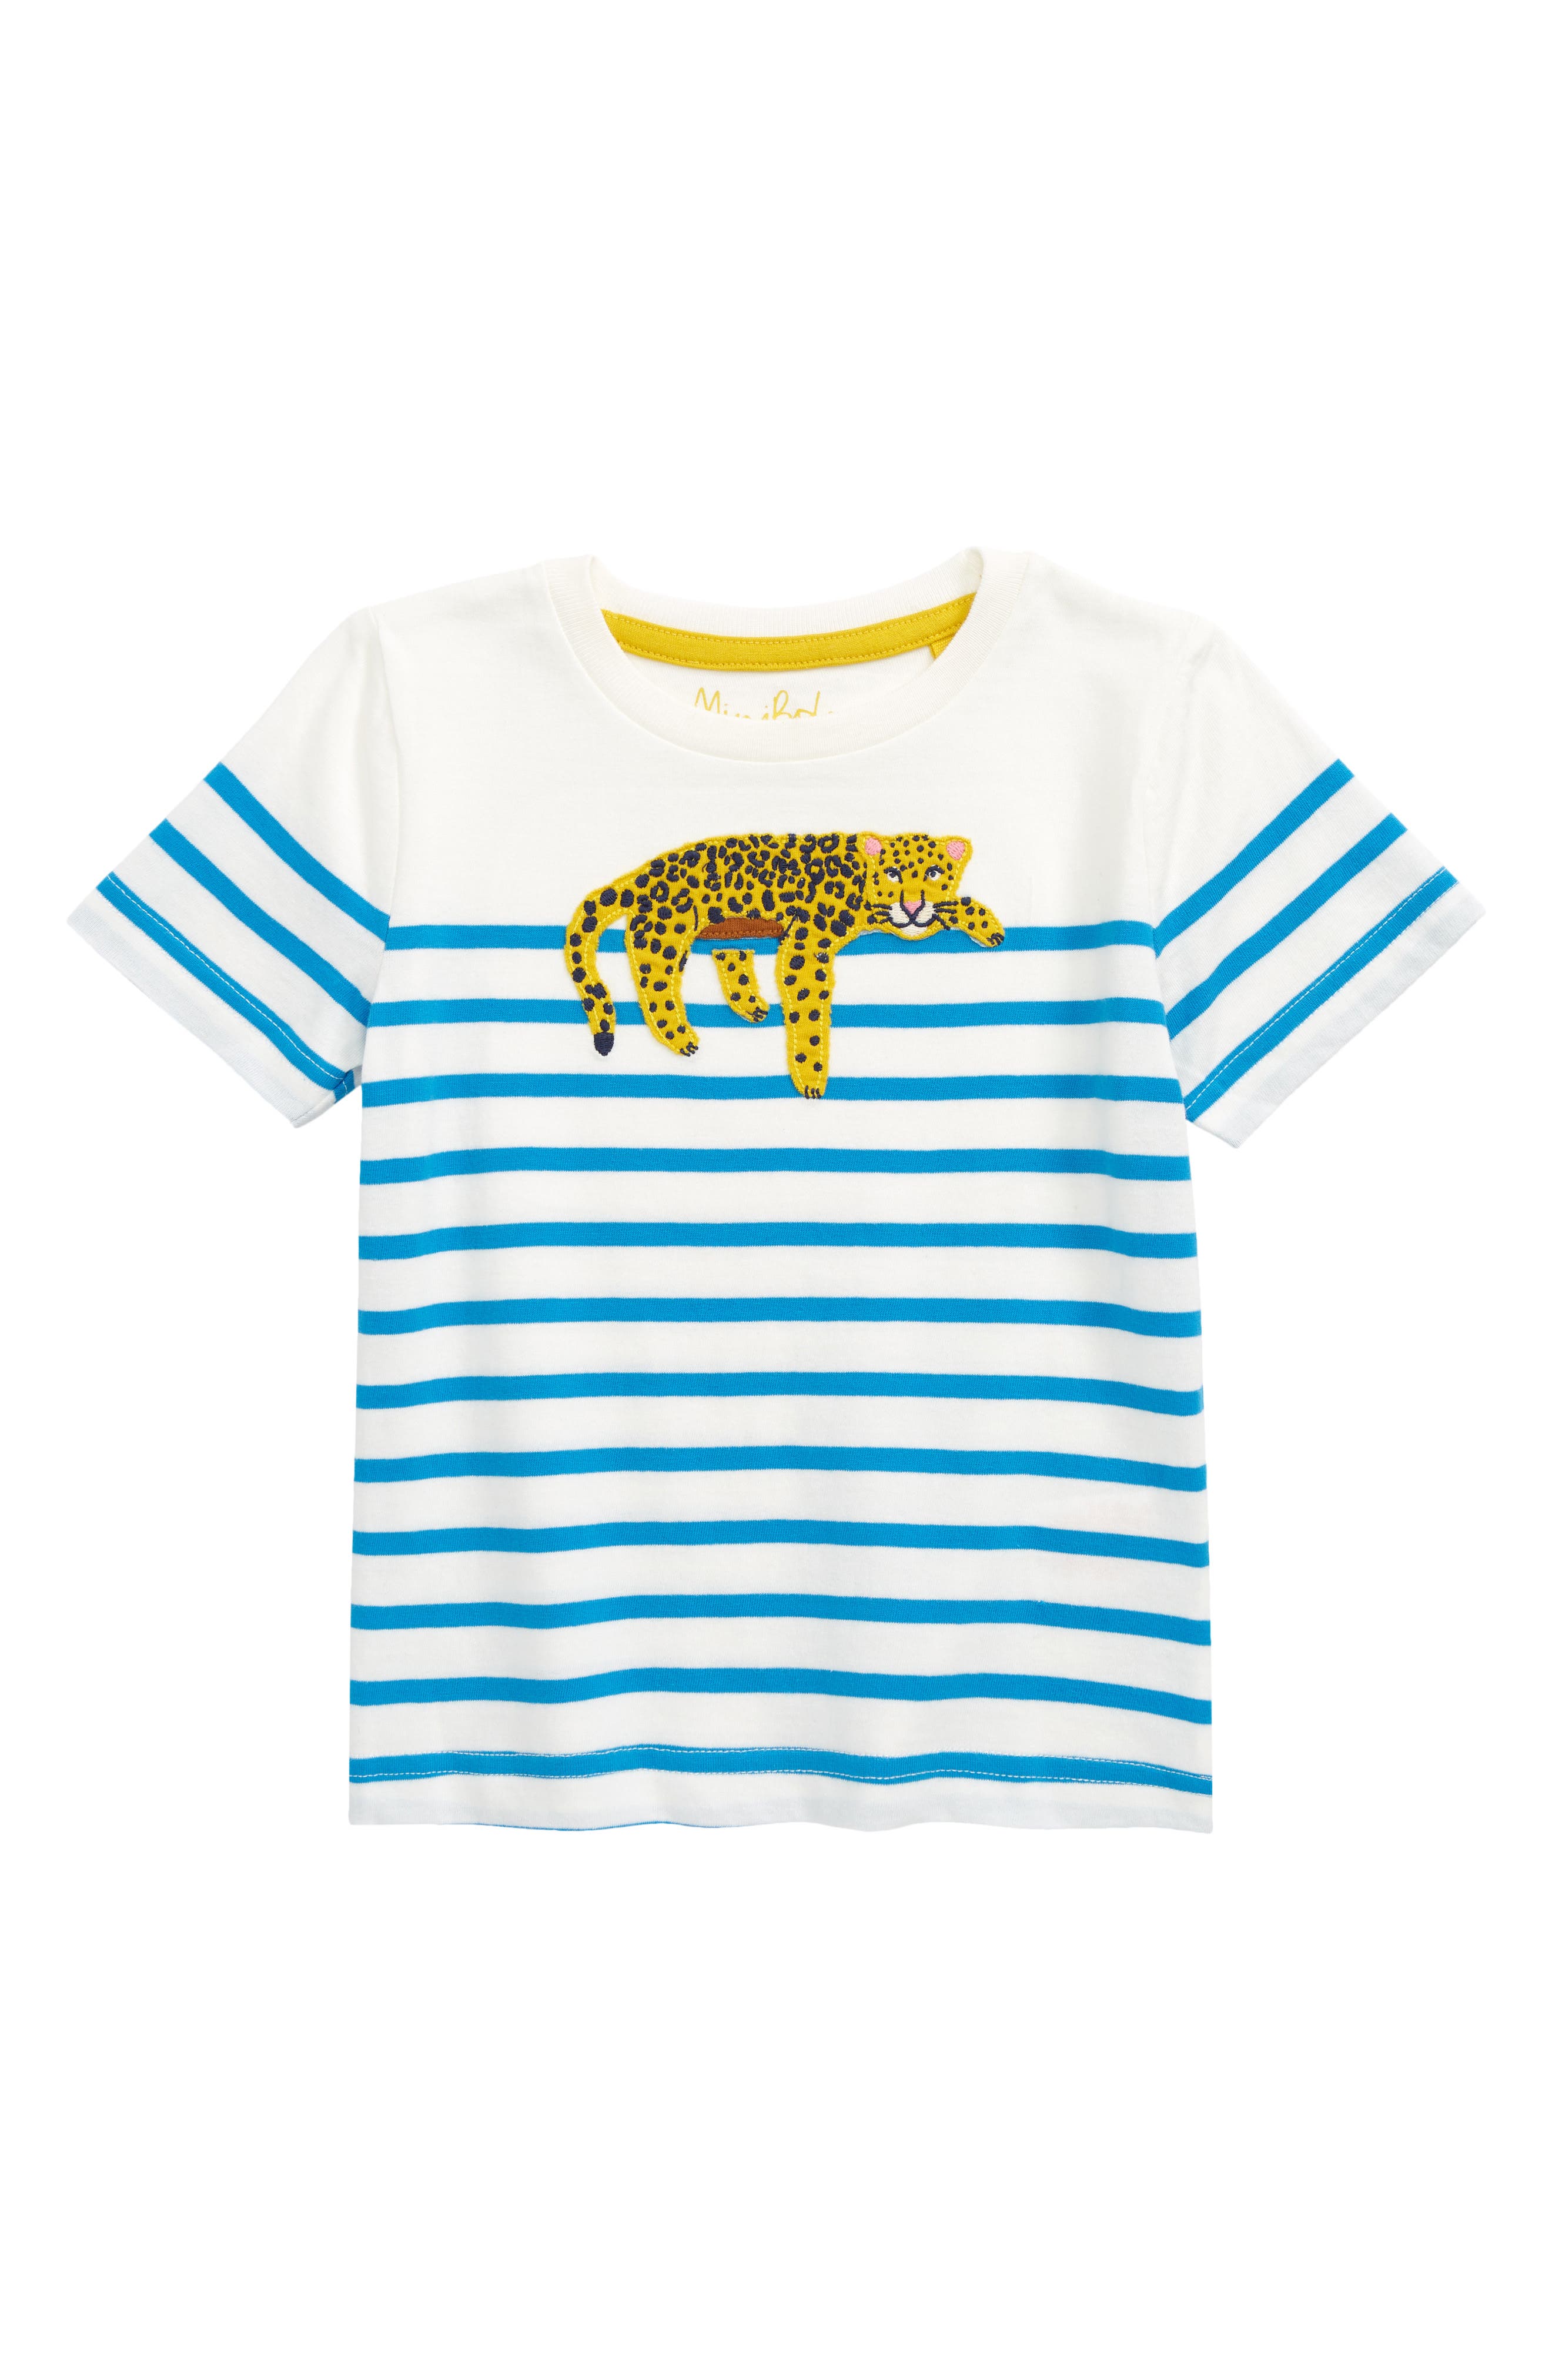 Size 3-4 years Brand new. Mini Boden Boys Fabulous soft cotton striped Top 